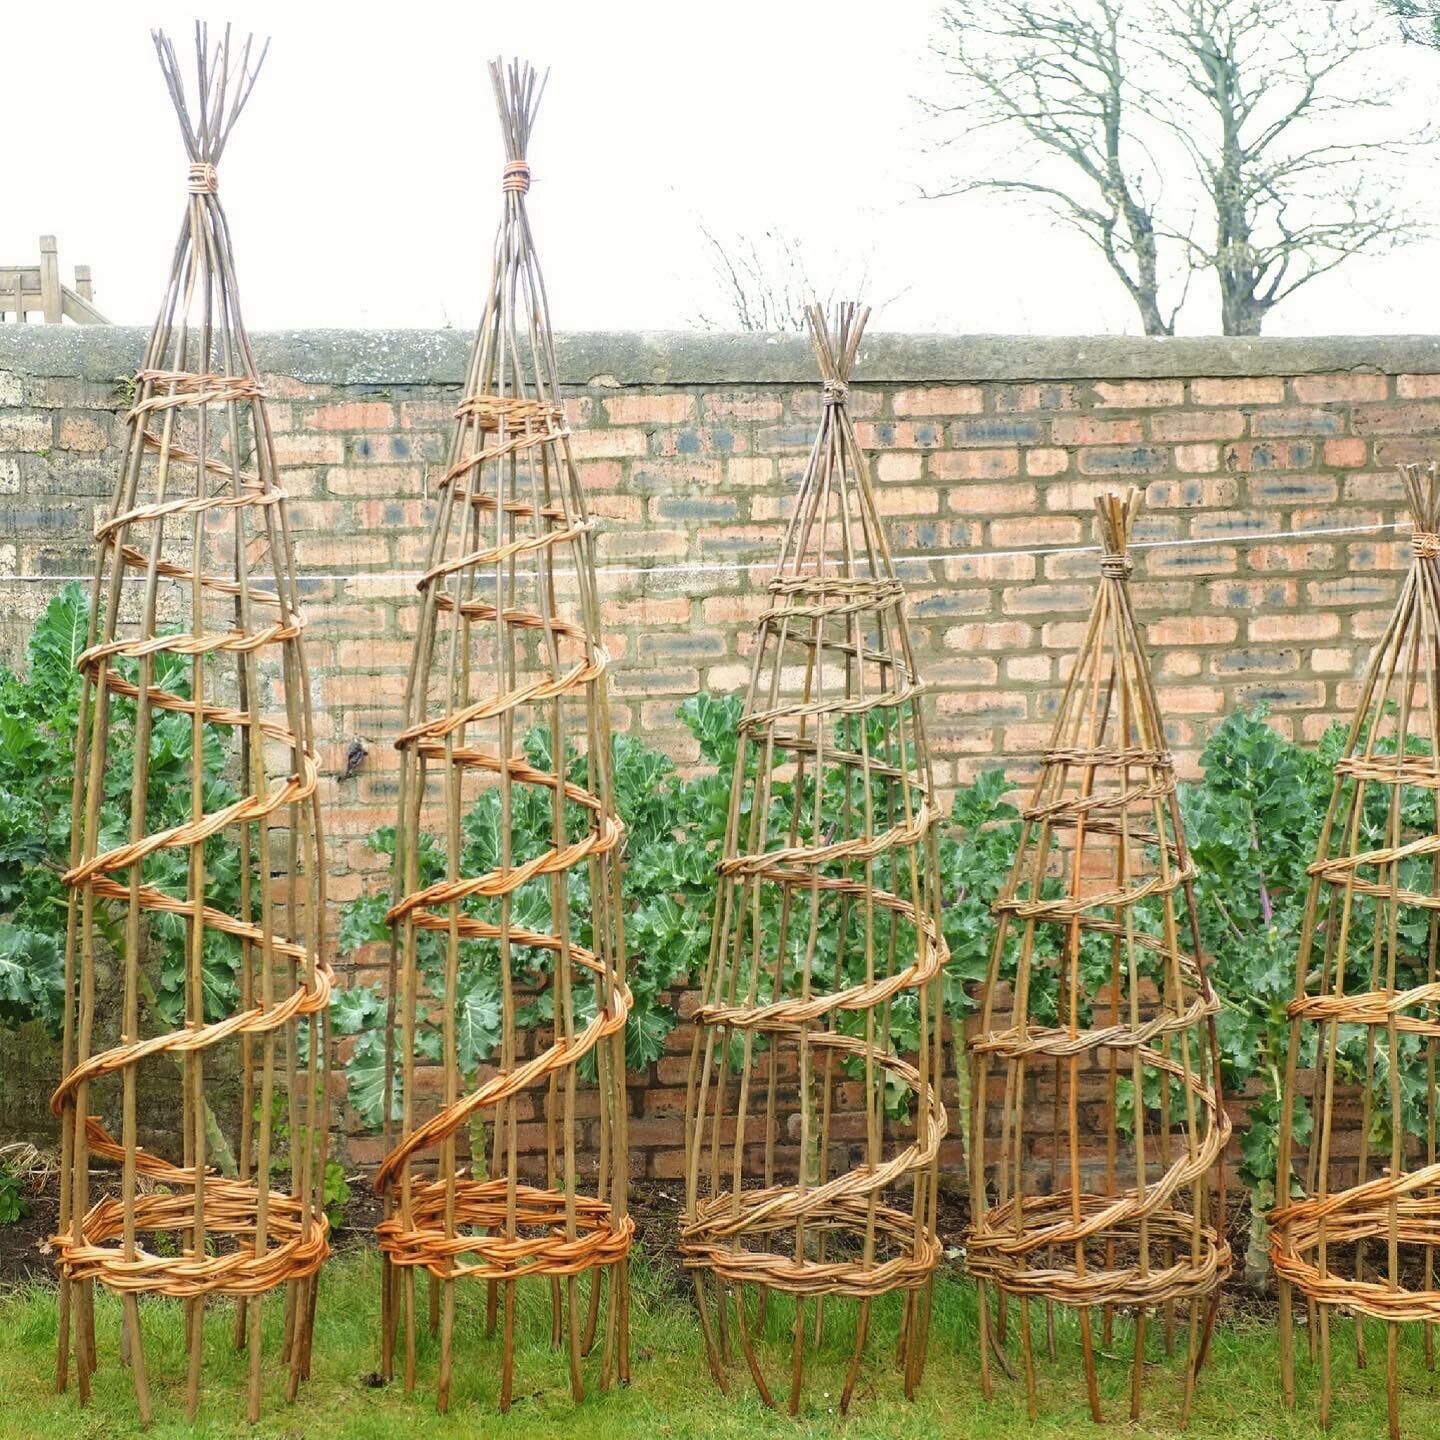 Pea Cones! Available through my website (www.annaliebmann.net), in 5&rsquo;, 6&rsquo;, and 7&rsquo; versions.

Made using local willow from #thefield in Duddingston, #archerfieldwalledgarden near North Berwick, and Somerset willow. 

Great for growin